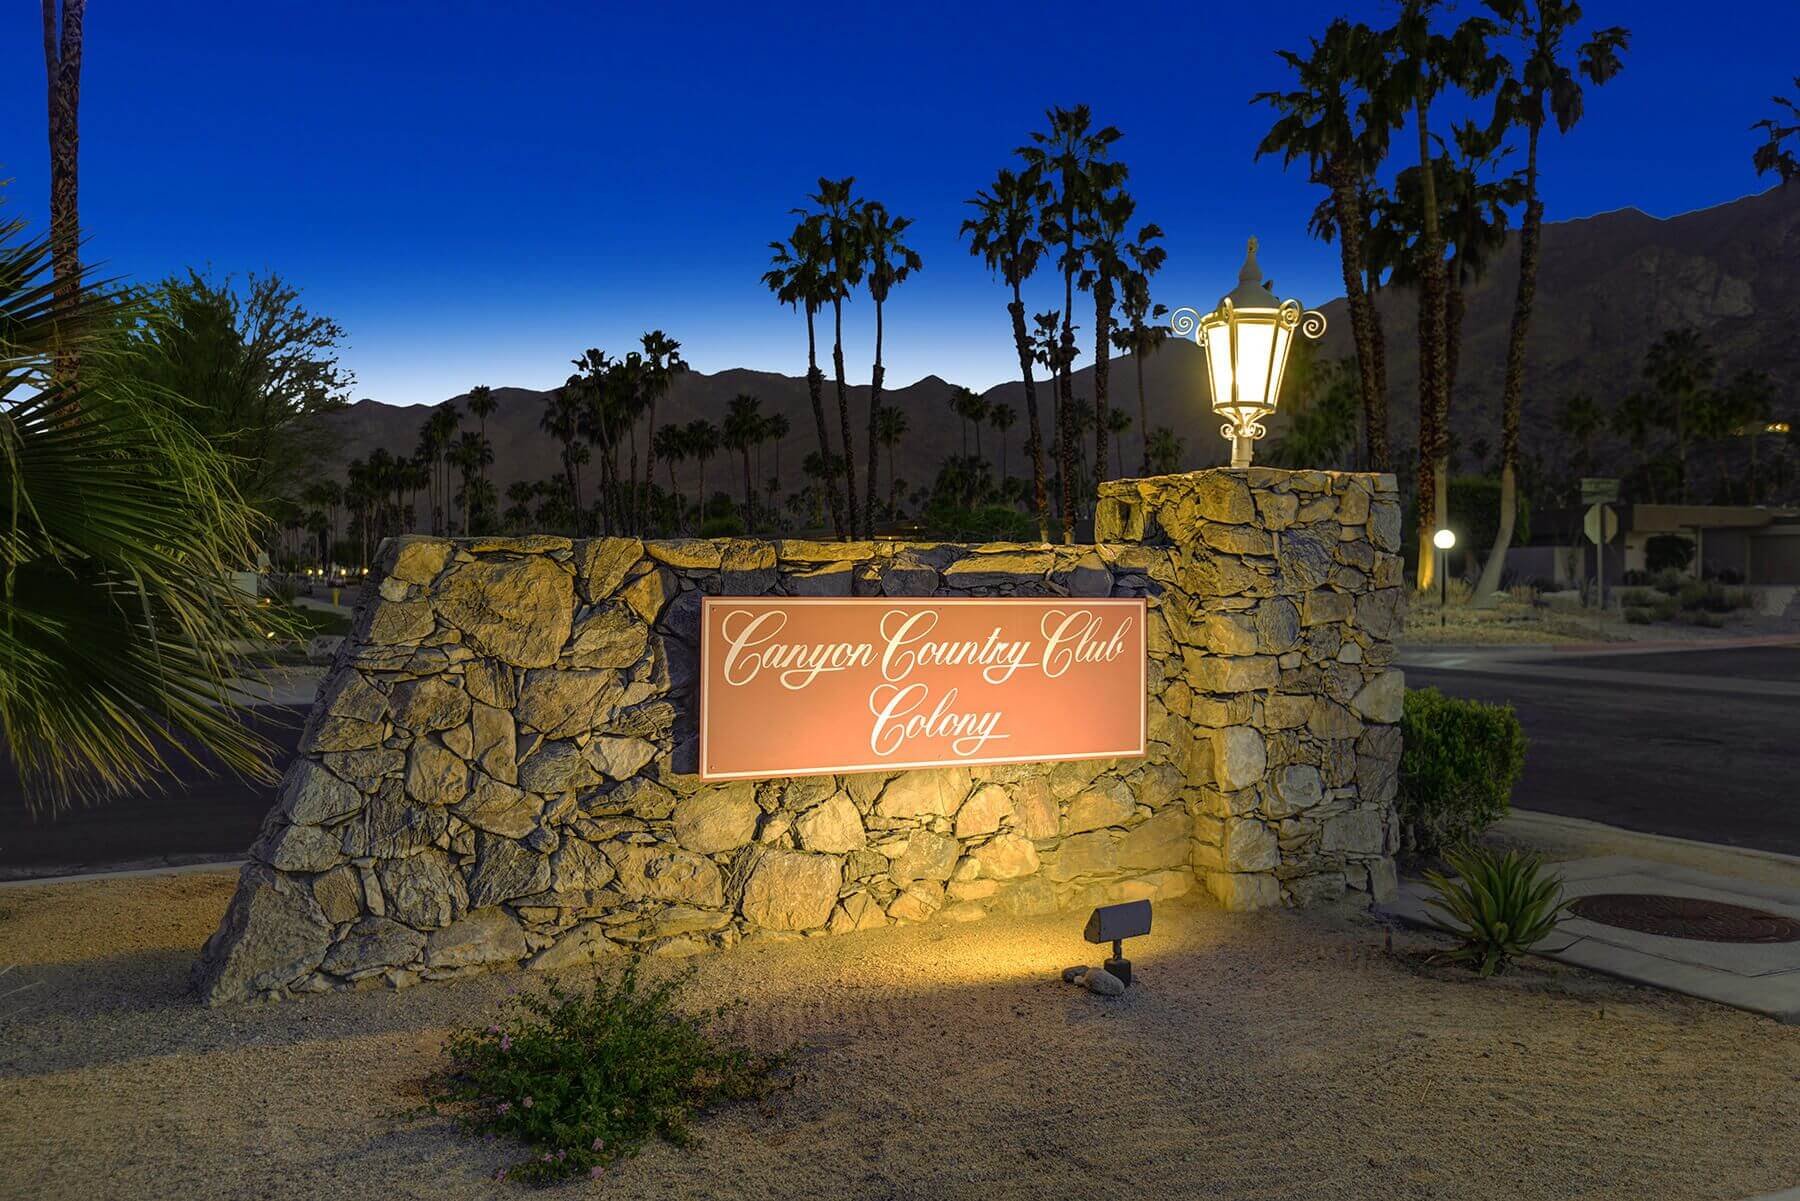 Canyon Country Club Colony Palm Springs 92264